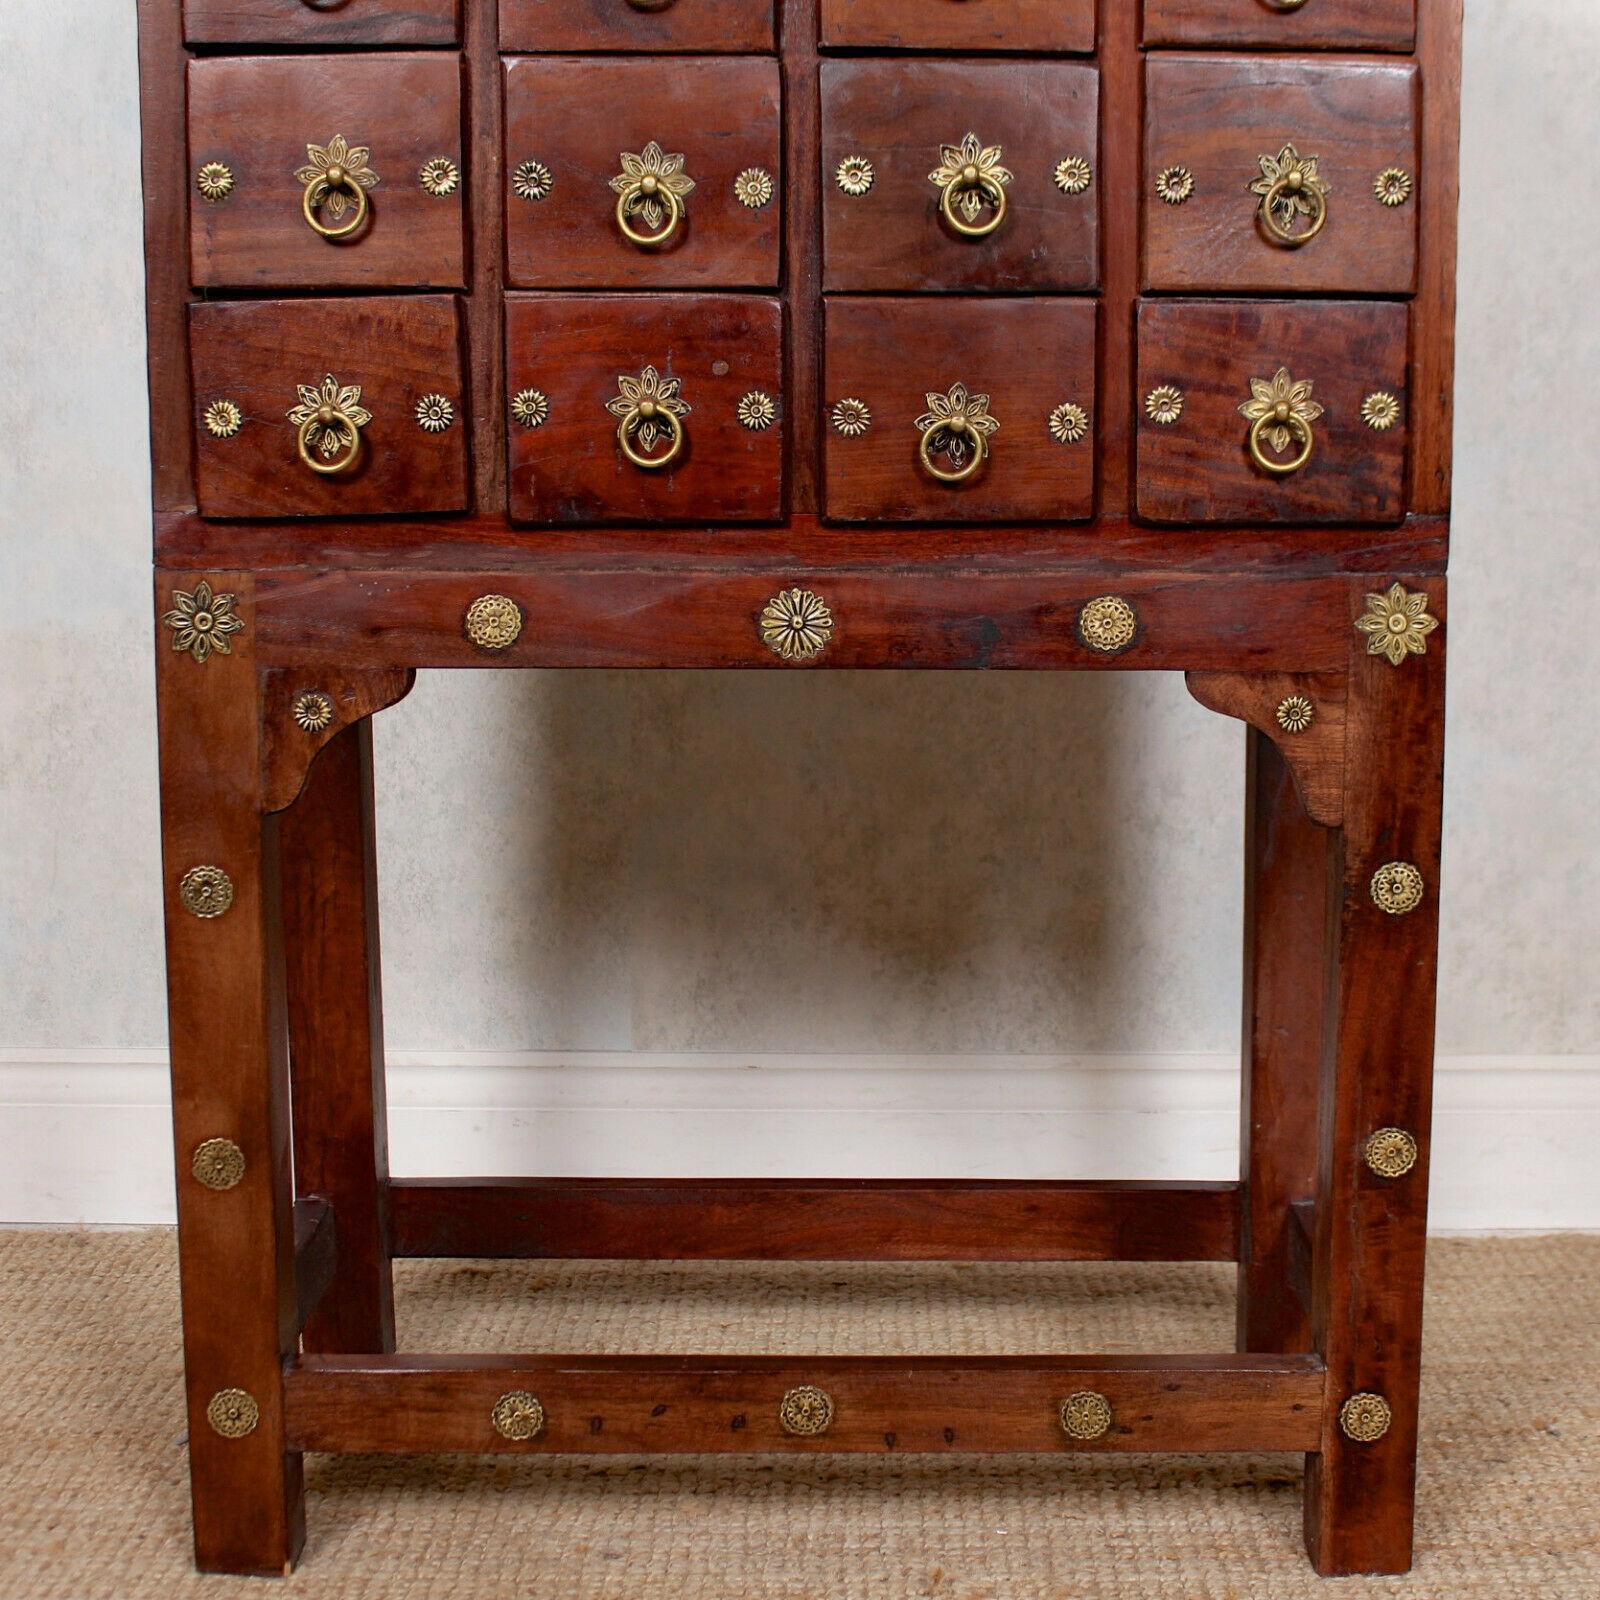 20th Century Chinese Apothecary Cabinet Spice Chest Haberdashery Oriental Hardwood For Sale